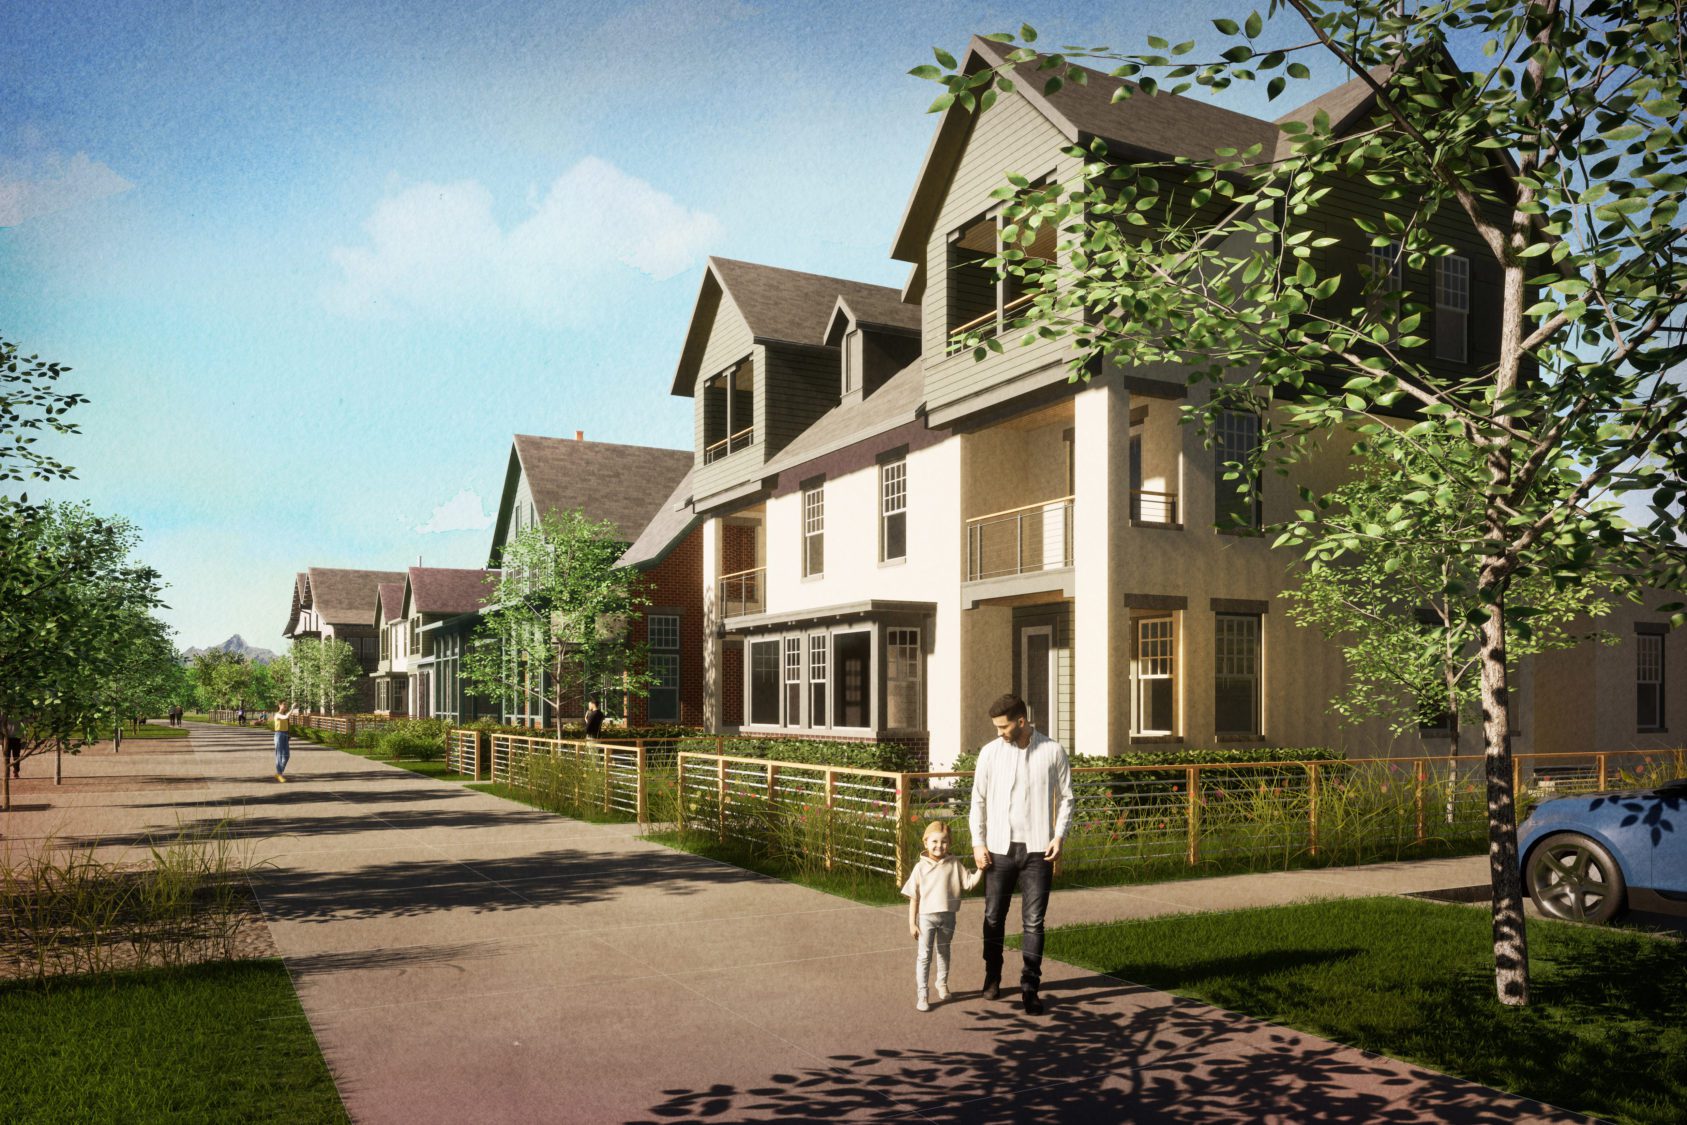 Rendered elevation of Paired Villas community